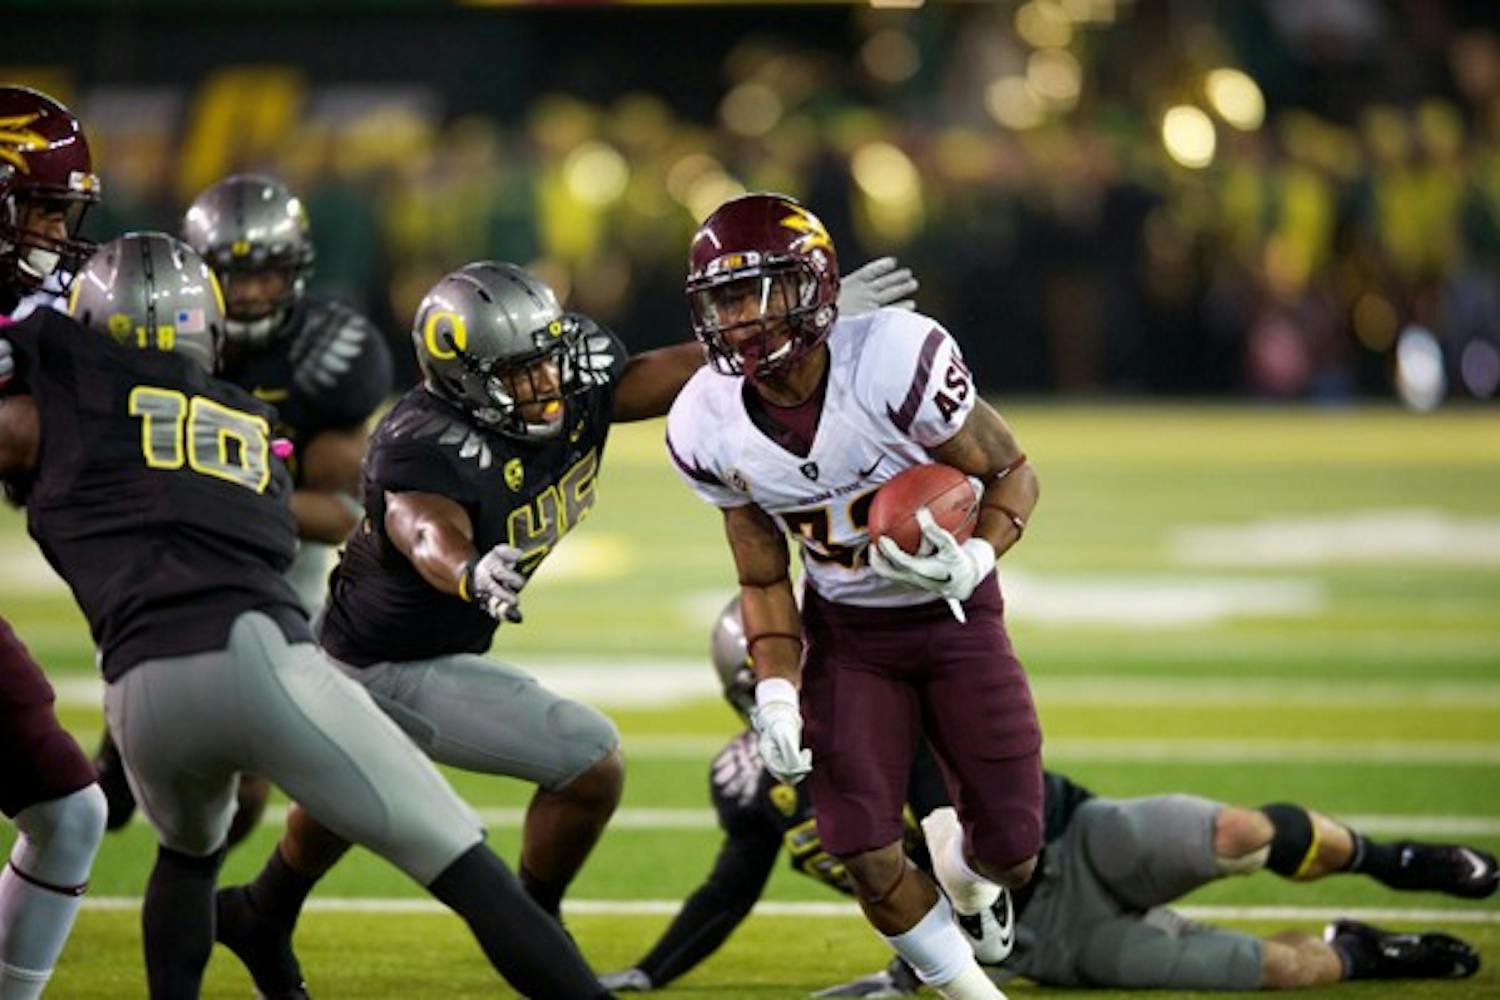 UPSET BID FAILED: ASU junior wide receiver Jamal Miles runs to the outside during Oregon’s 41-27 win on Saturday. The Sun Devils scored 14 points in the first quarter, but had trouble moving the ball downfield in the second half. (Photo courtesy of Michael Arellano)